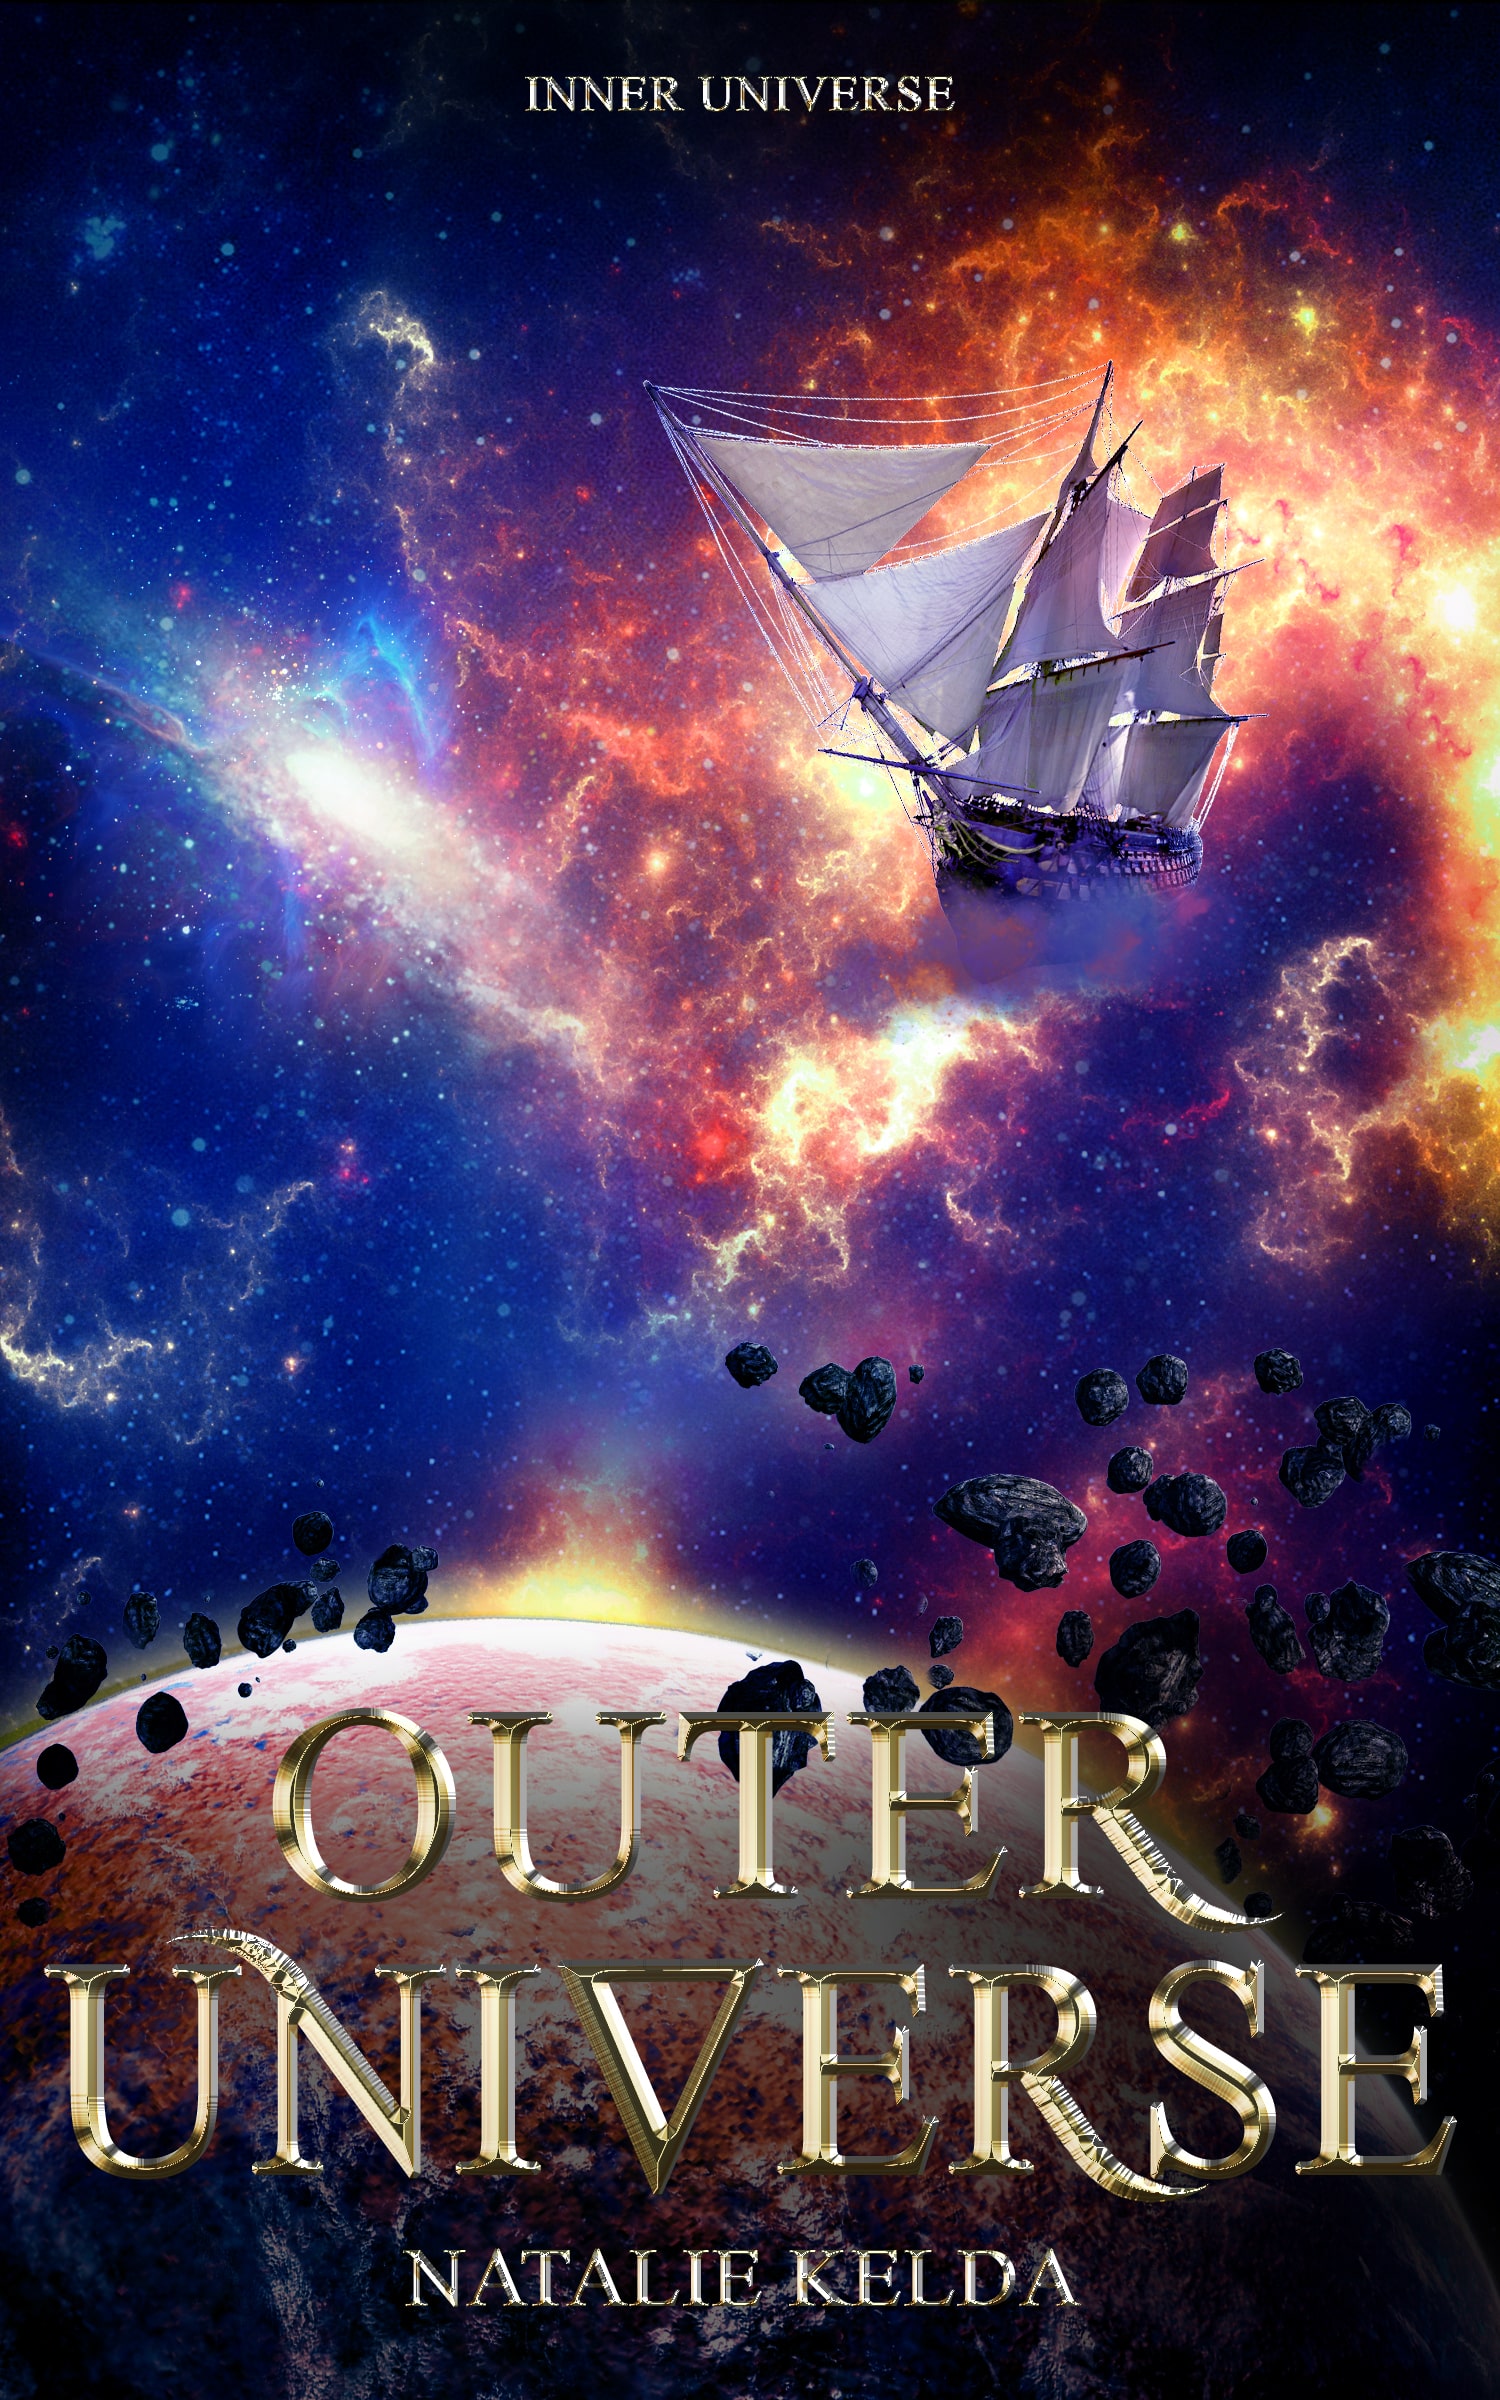 Outer Universe